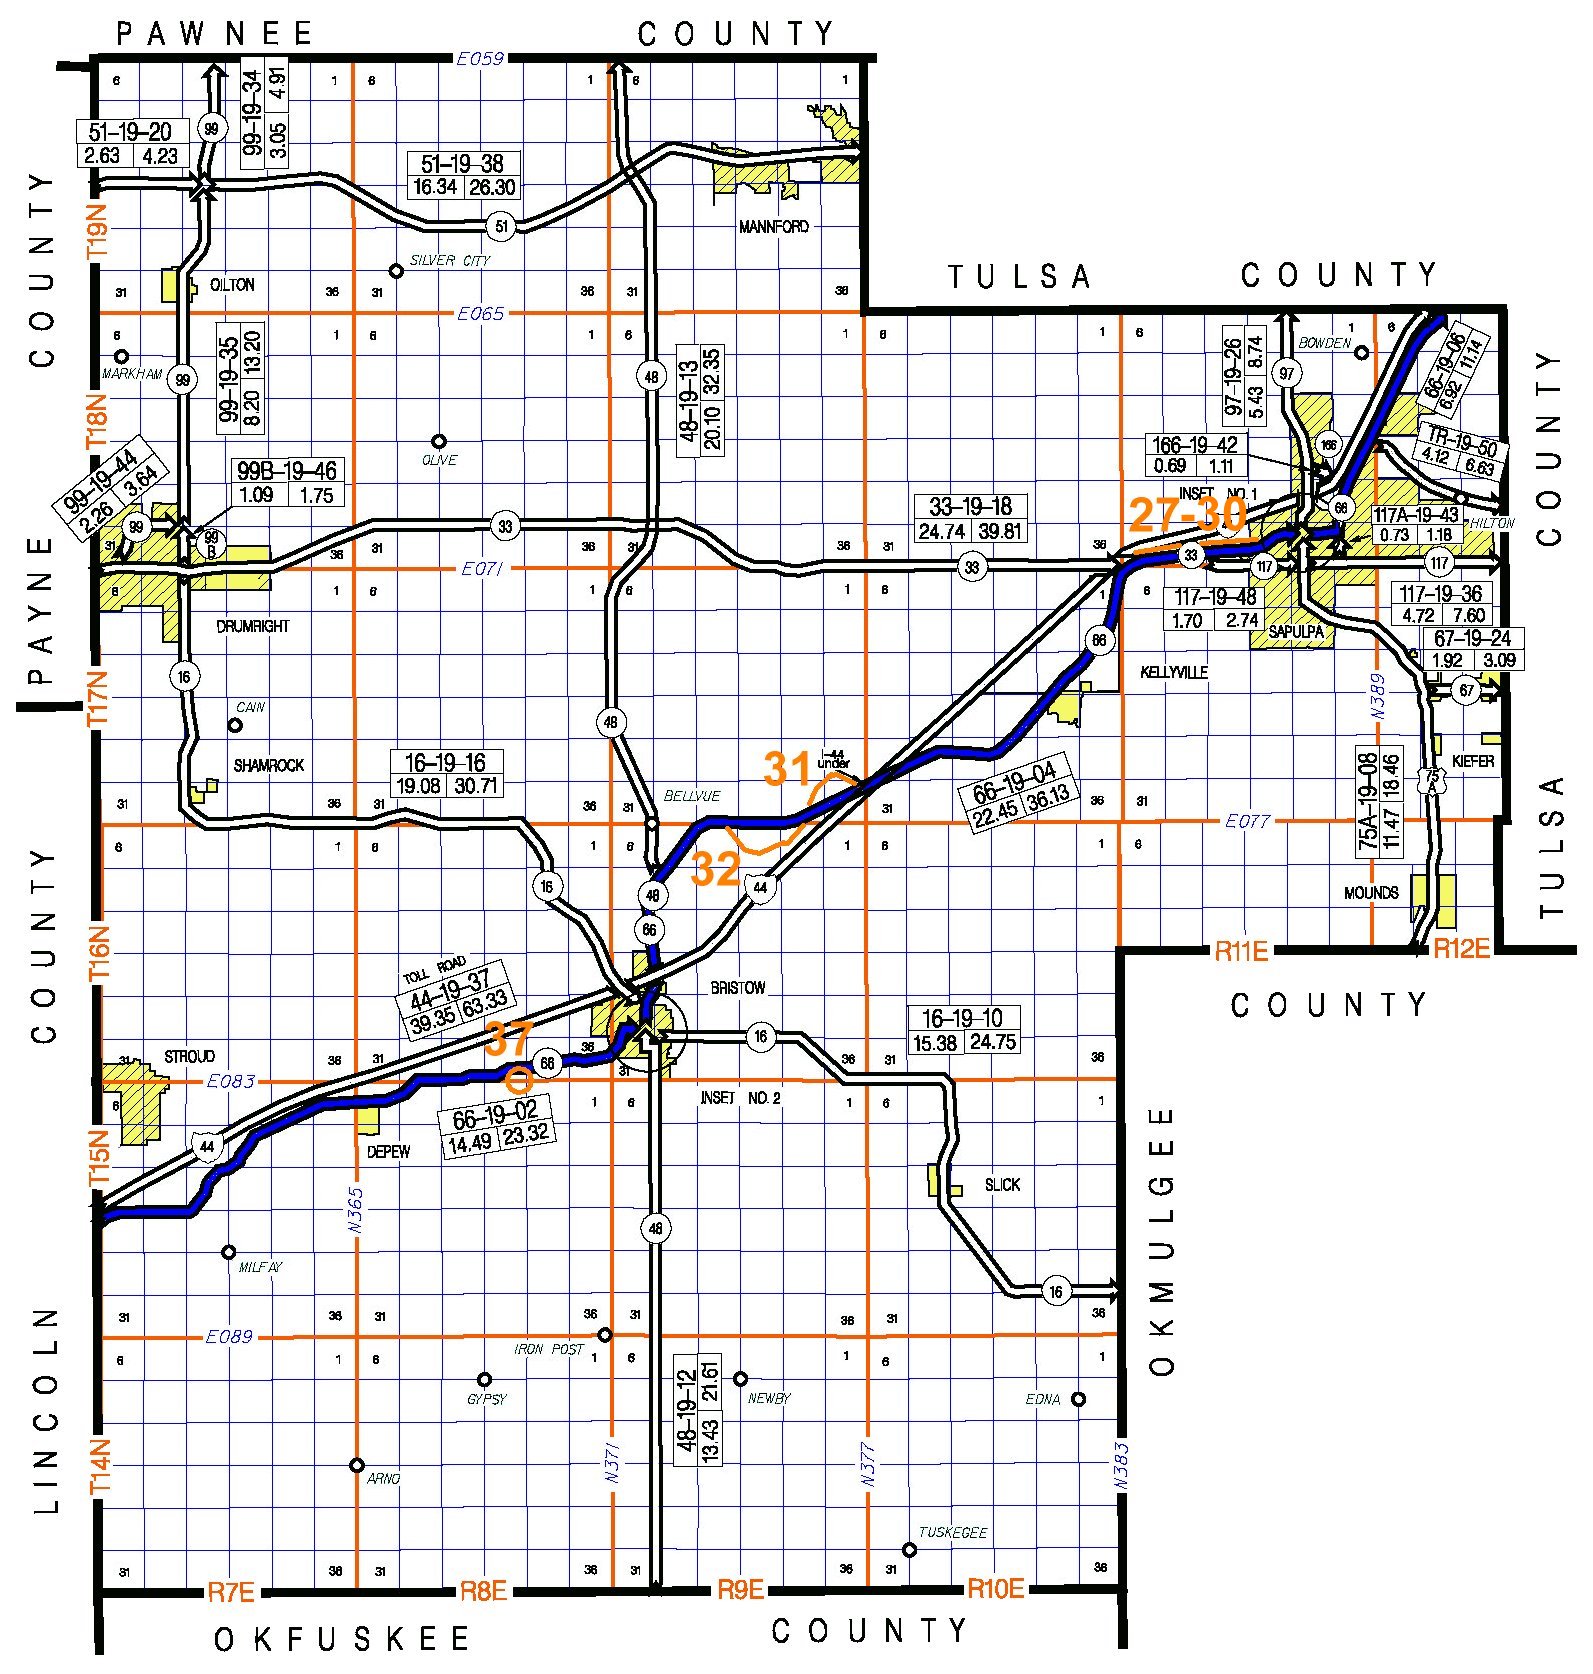 Odot Planning Research Division Route 66 Historic Maps